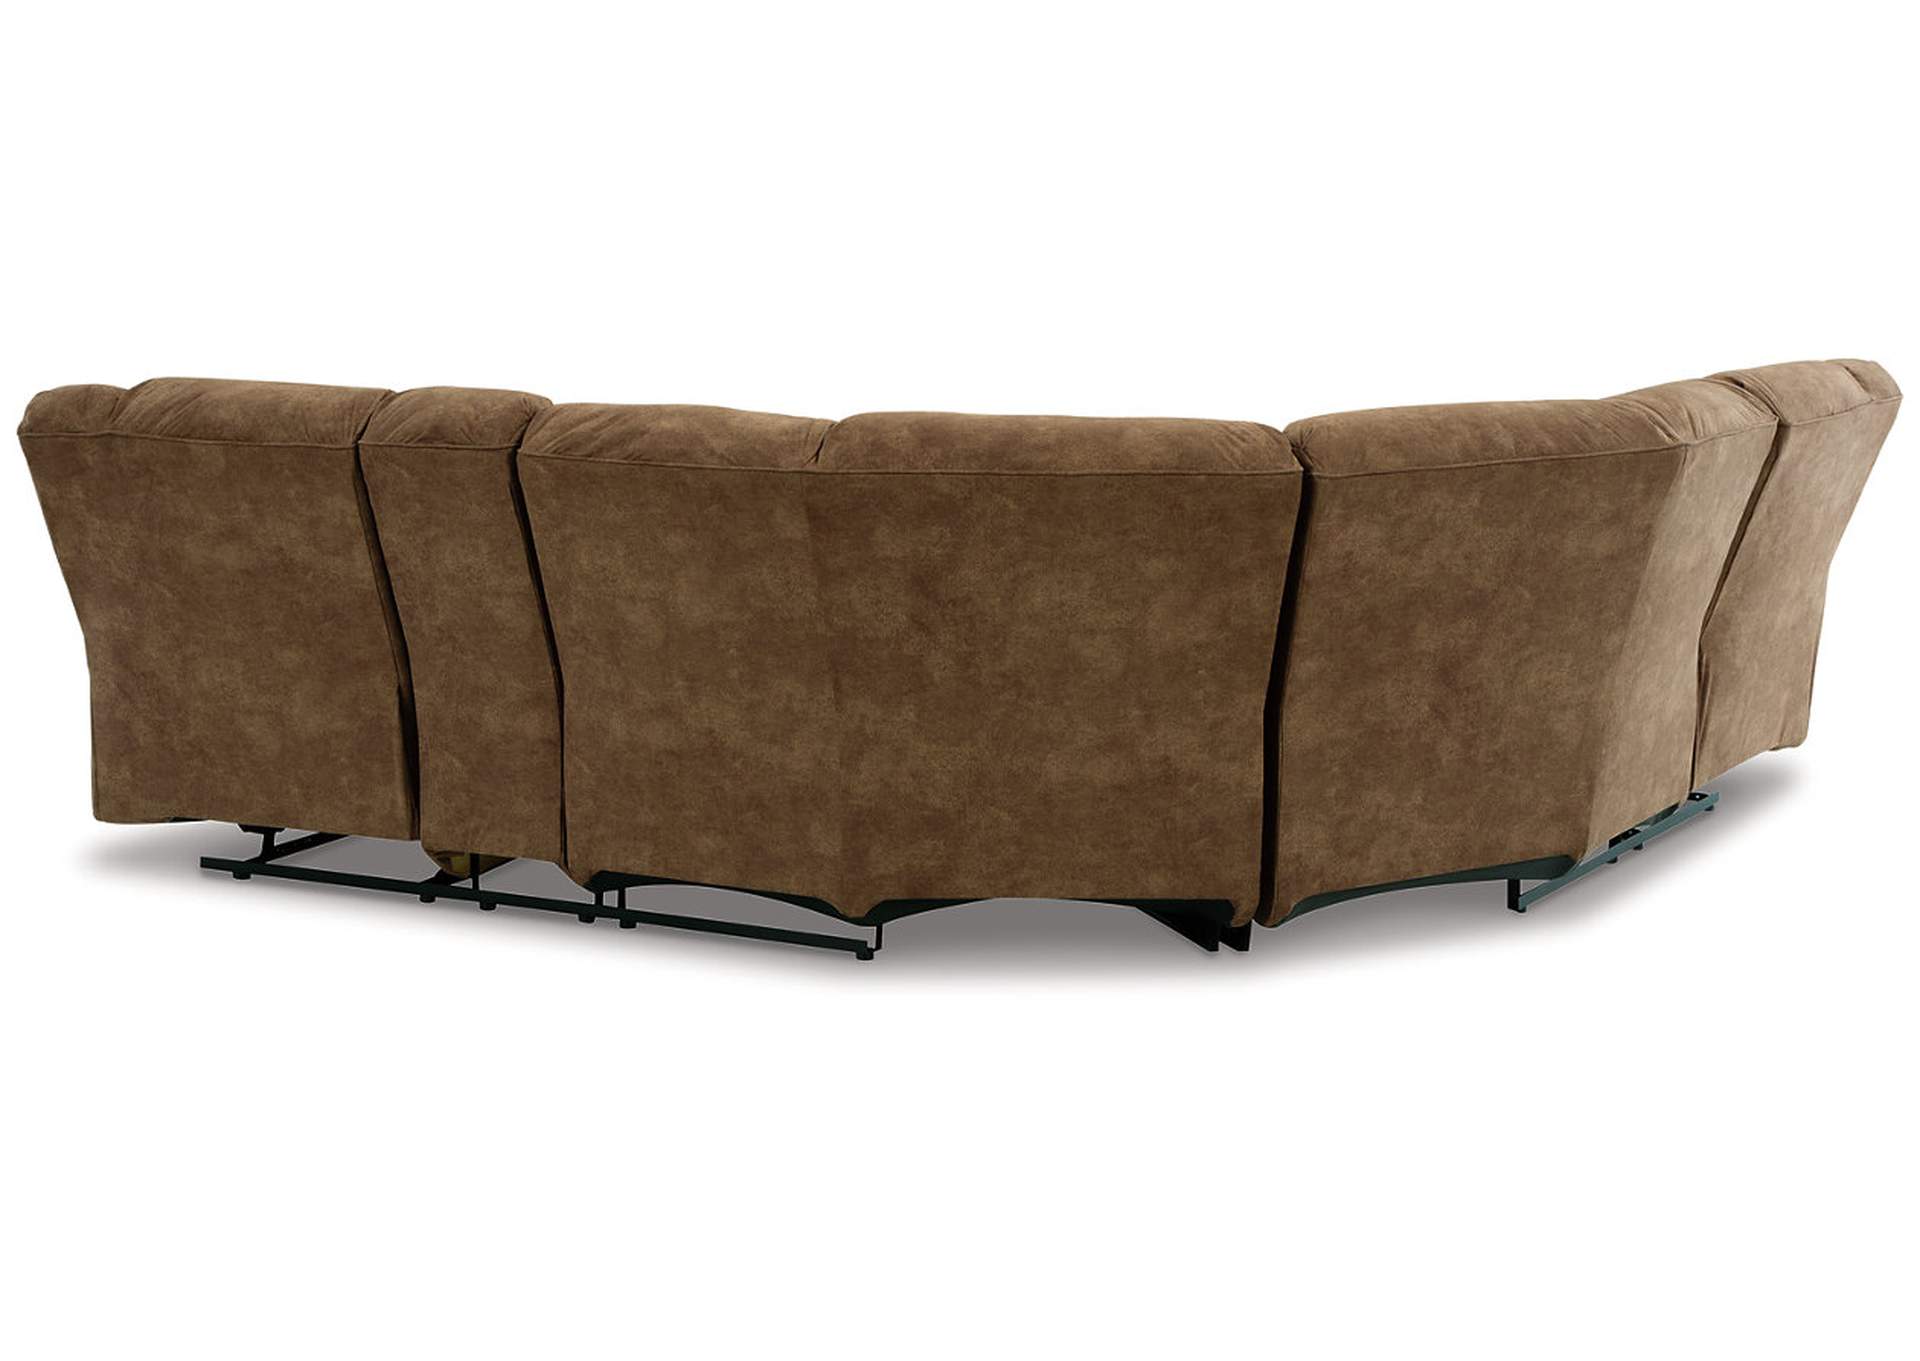 Partymate 2-Piece Reclining Sectional,Signature Design By Ashley